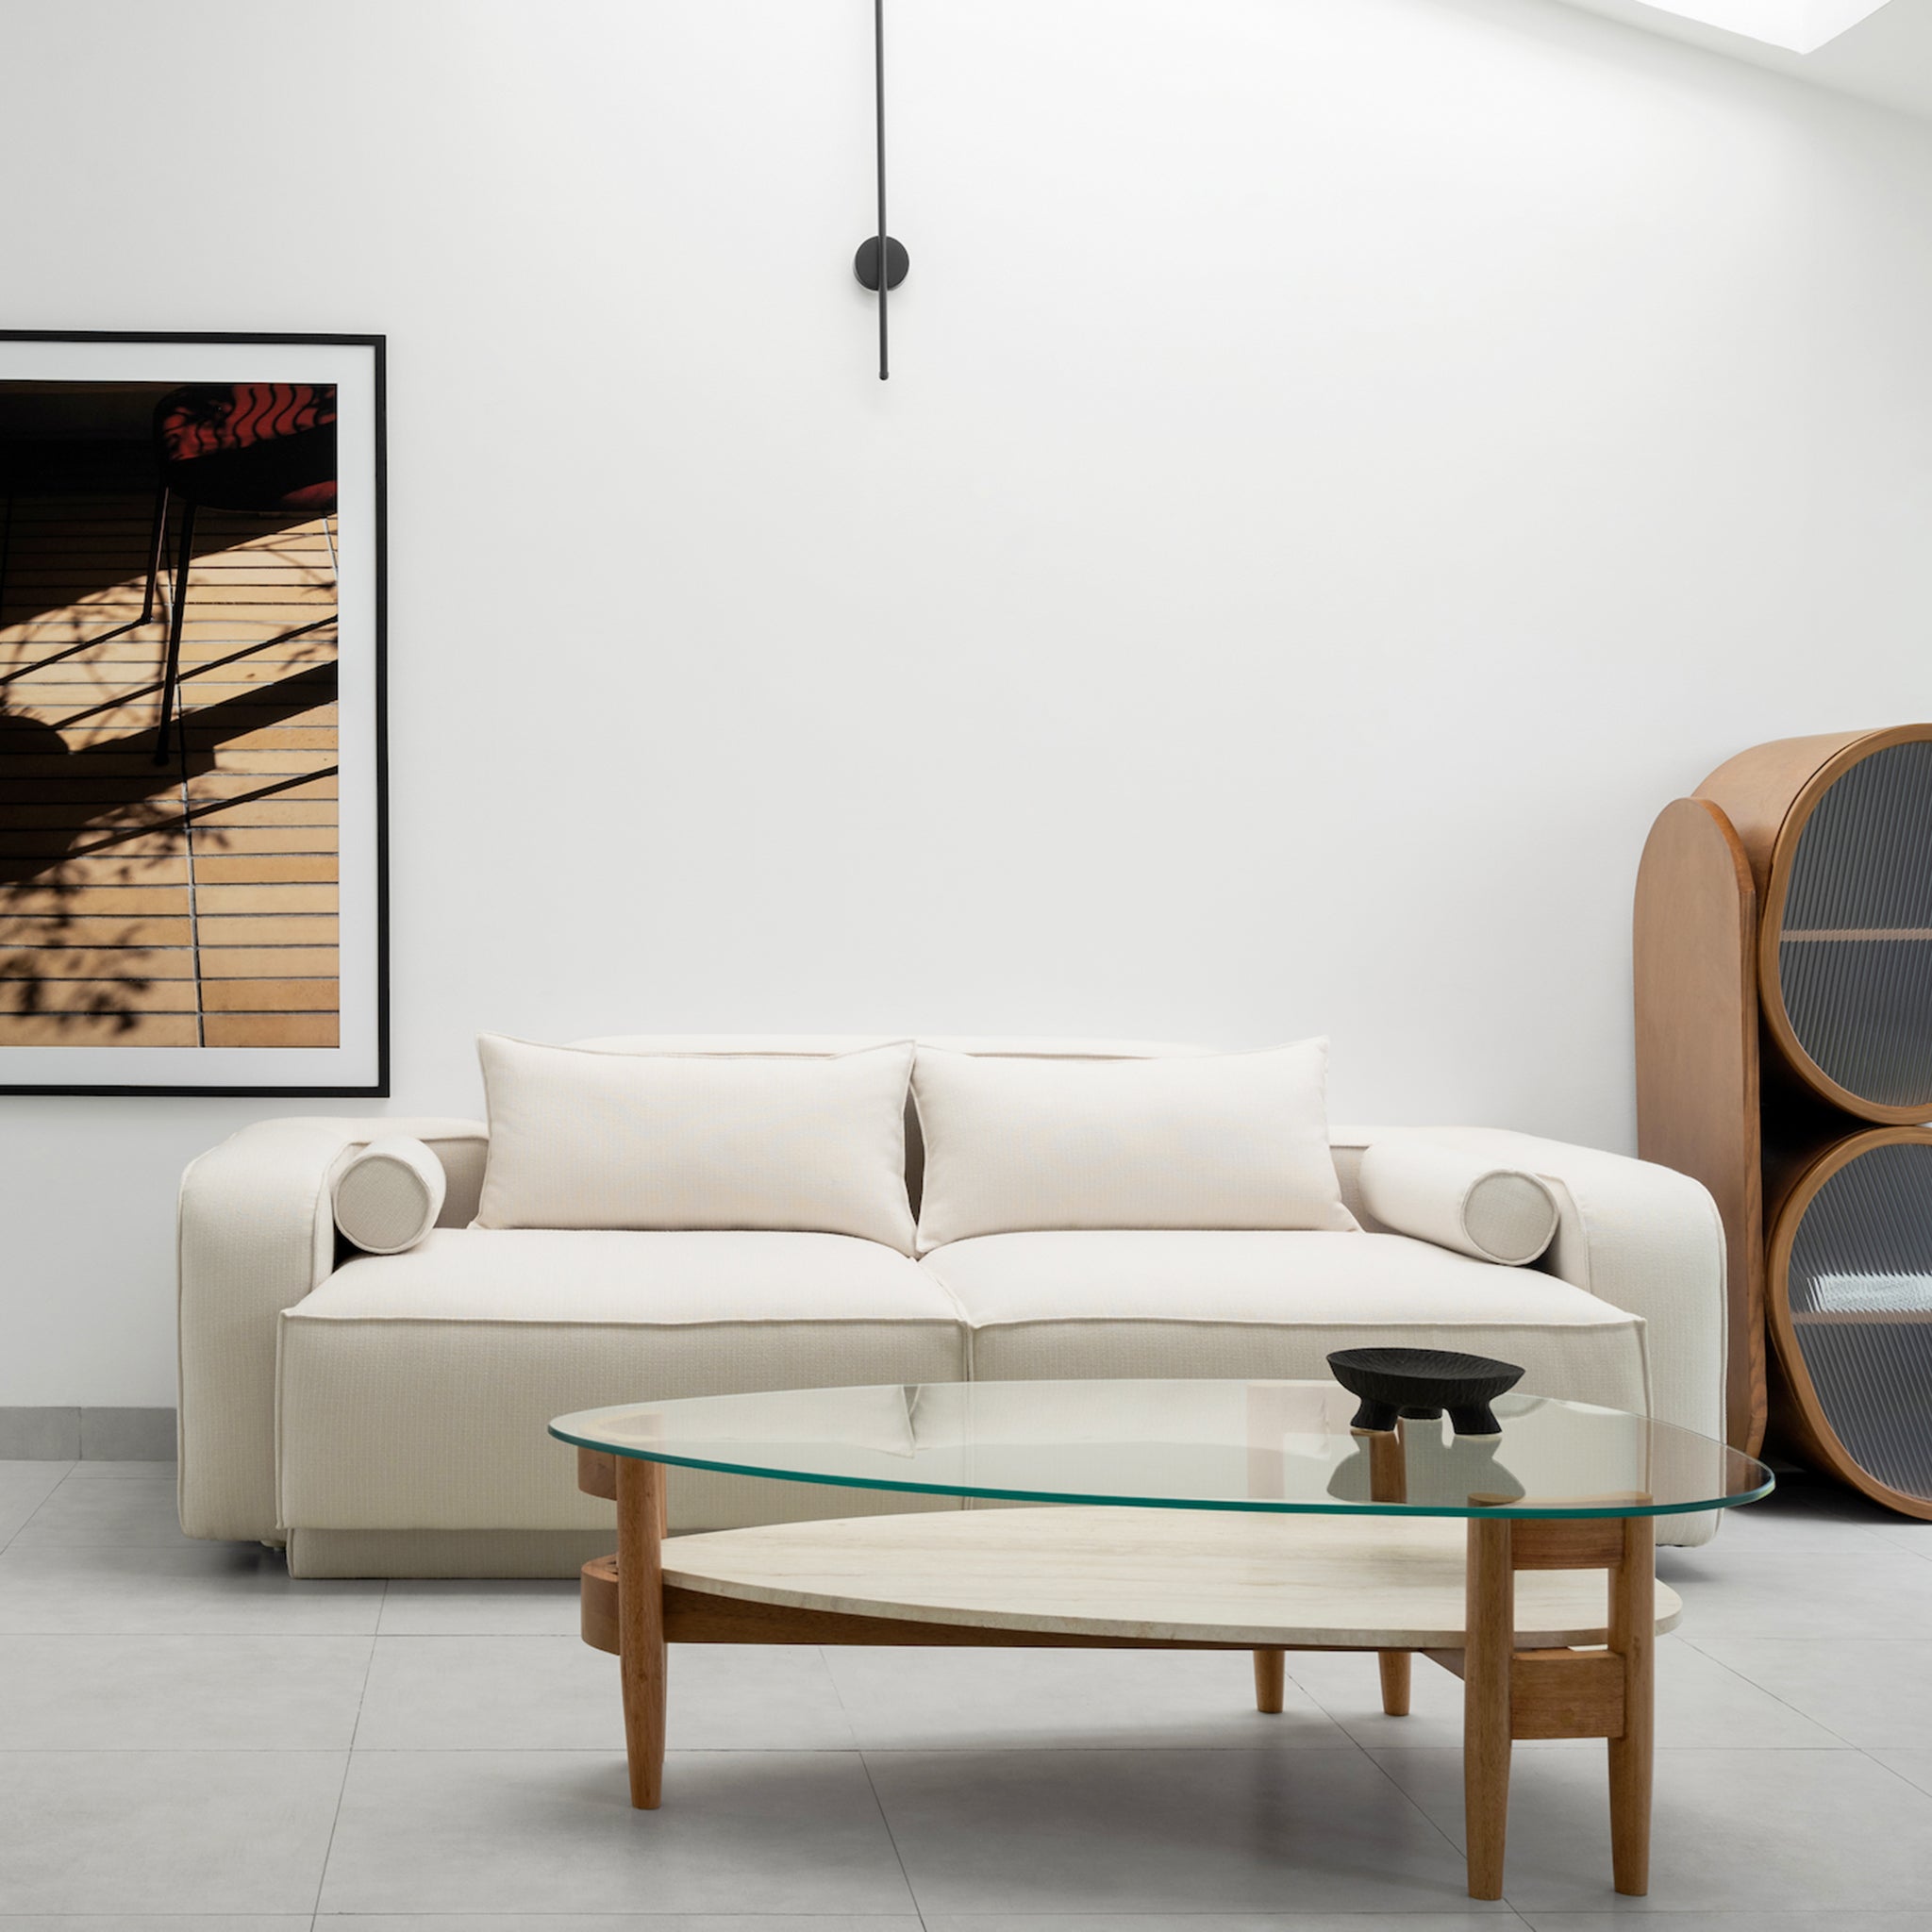 Mid-century modern living room with a white sectional sofa, brown leather ottoman, and round wood and black metal side table with lamp for a touch of sophistication.